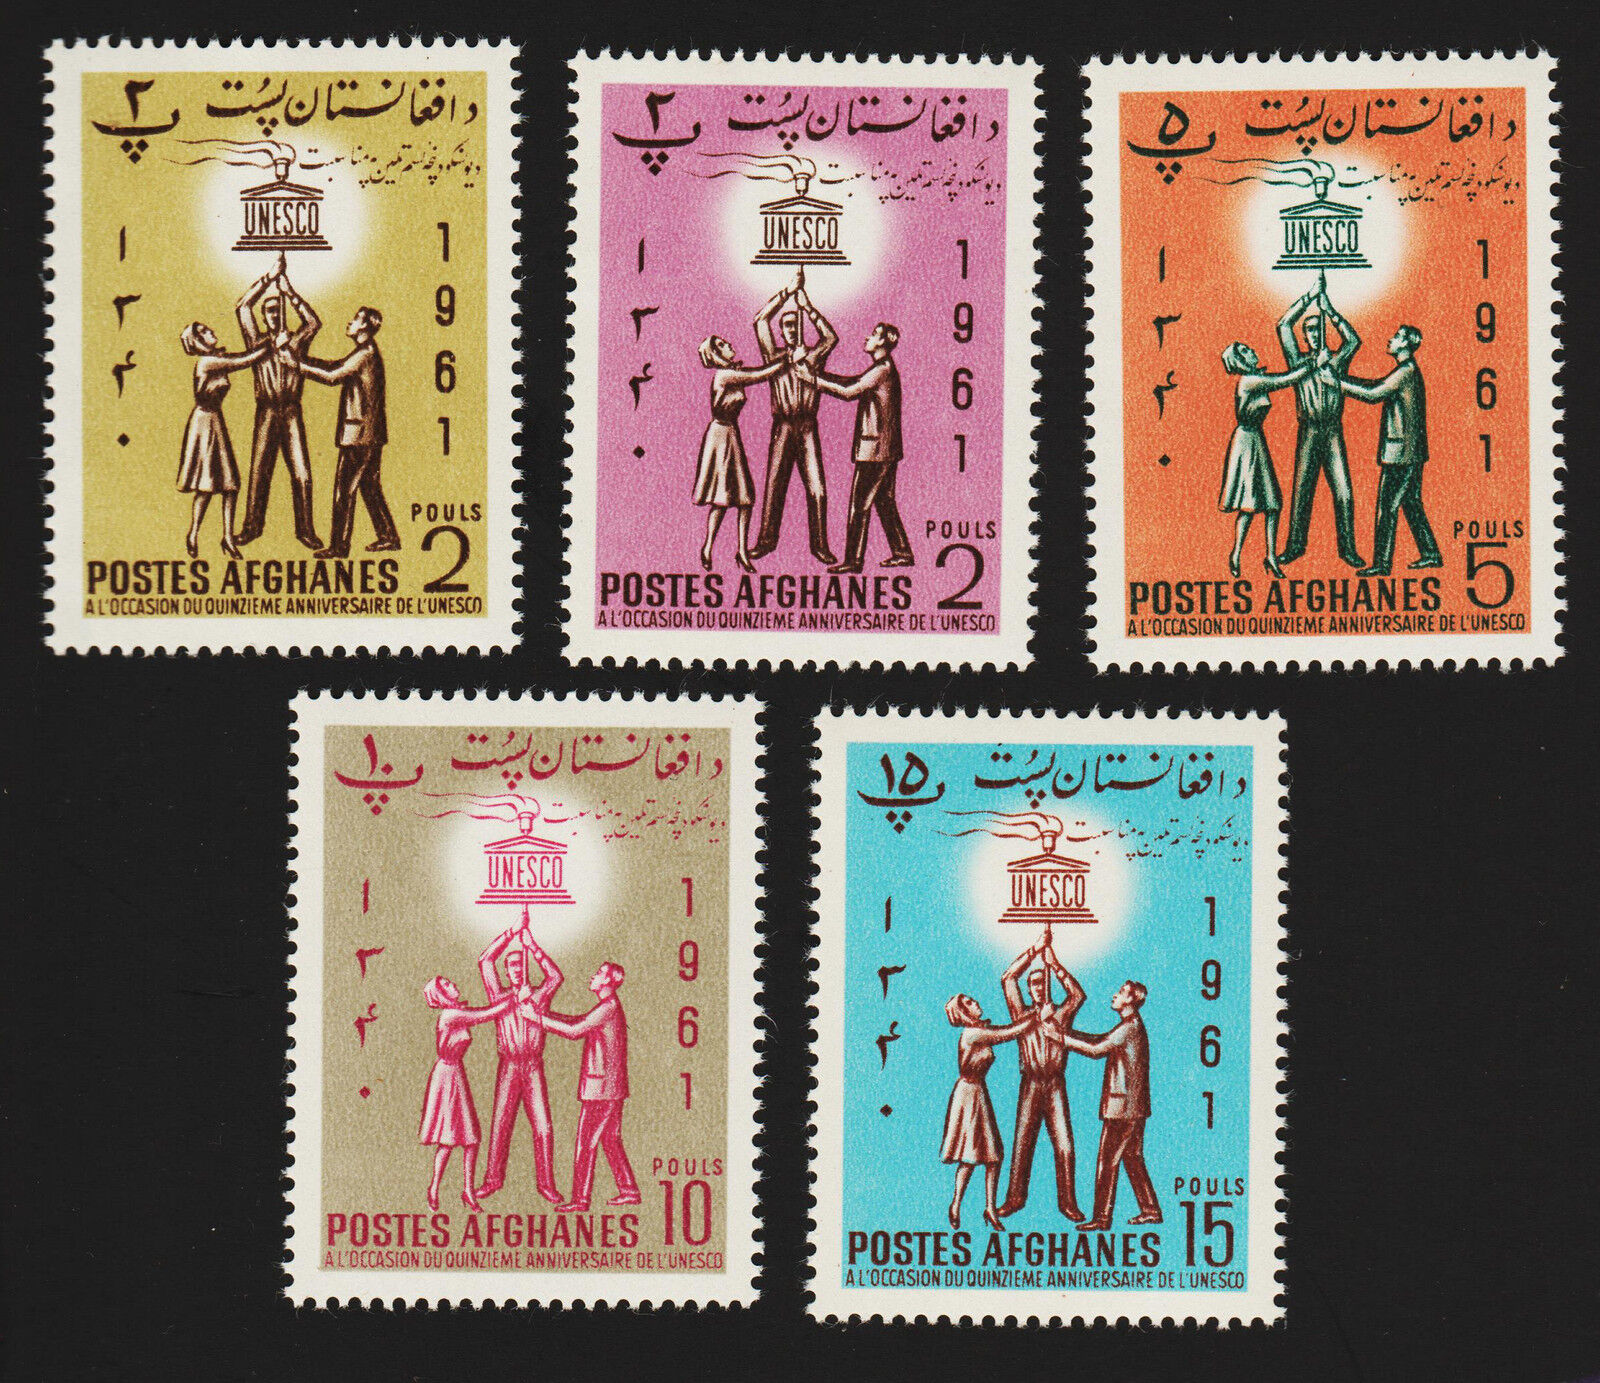 OPC 1962 Afghanistan Unesco Set Sc#553-7 MNH Animer and price revision All items free shipping